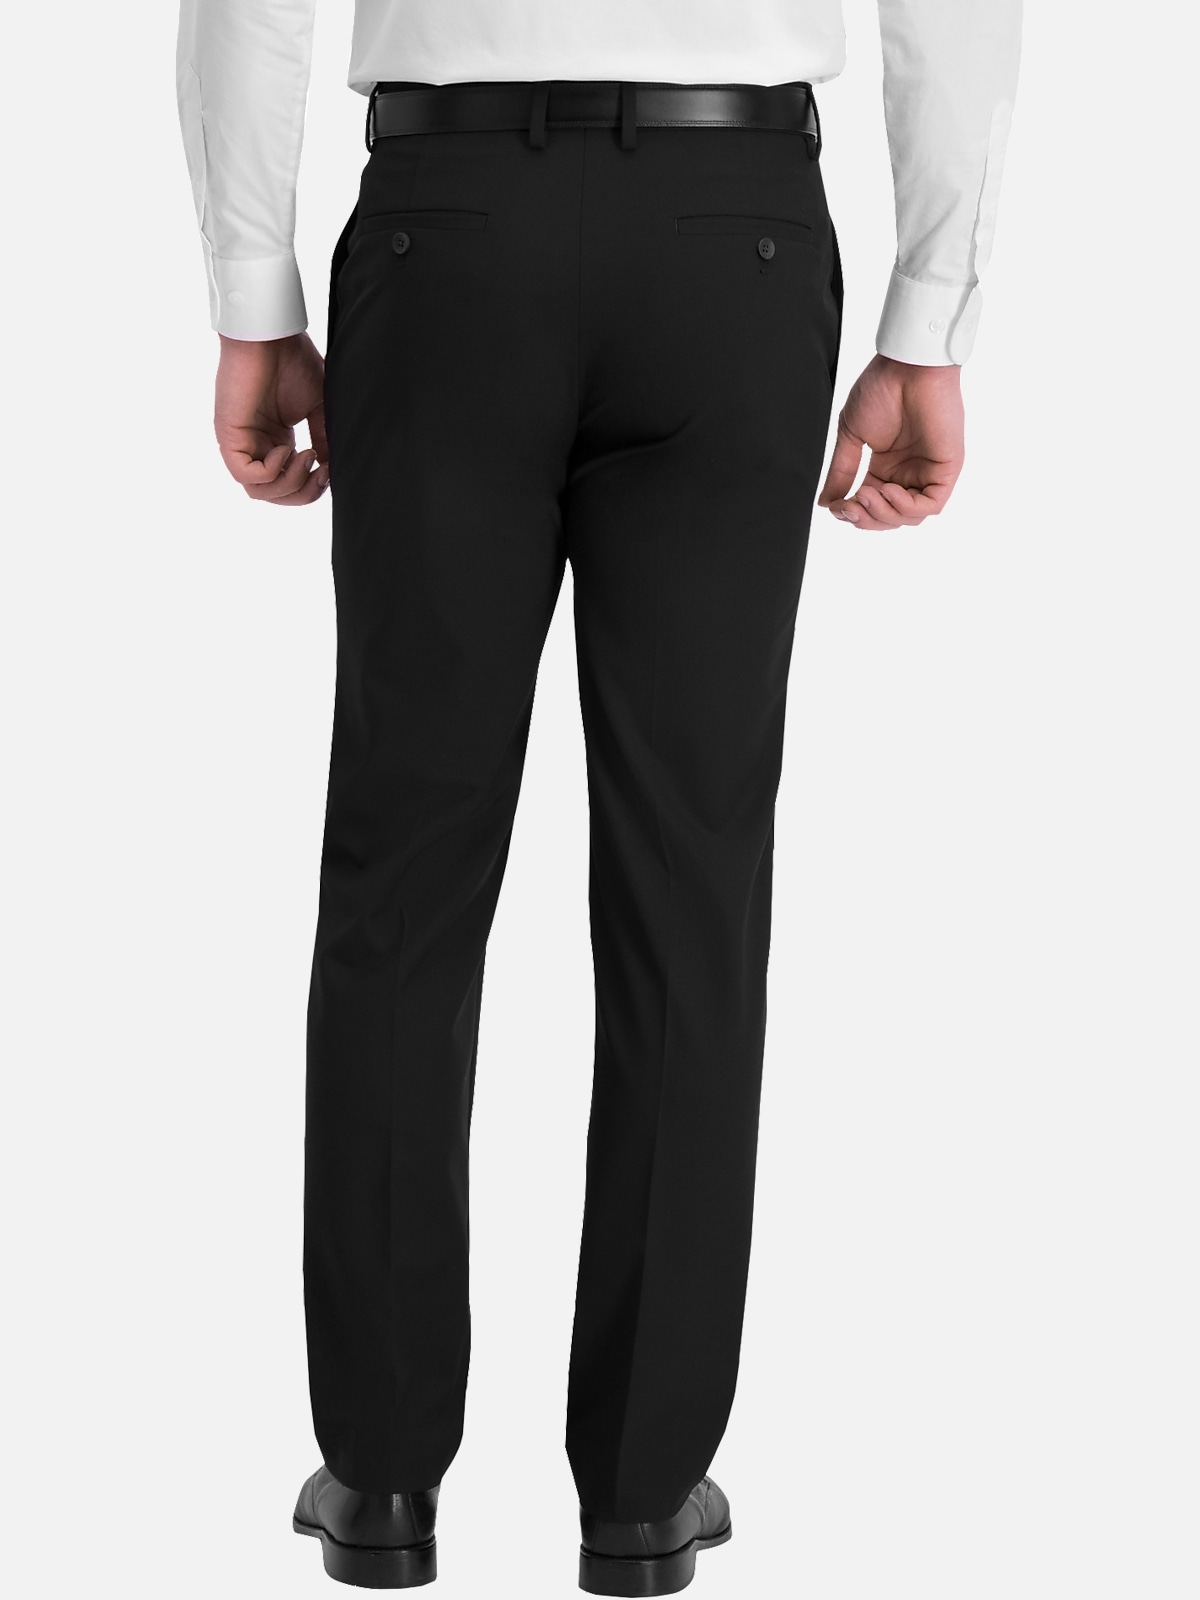 https://image.menswearhouse.com/is/image/TMW/TMW_3Y55_02_HAGGAR_SUIT_SEPARATE_PANTS_BLACK_SOLID_ALT1?imPolicy=pdp-zoom-mob